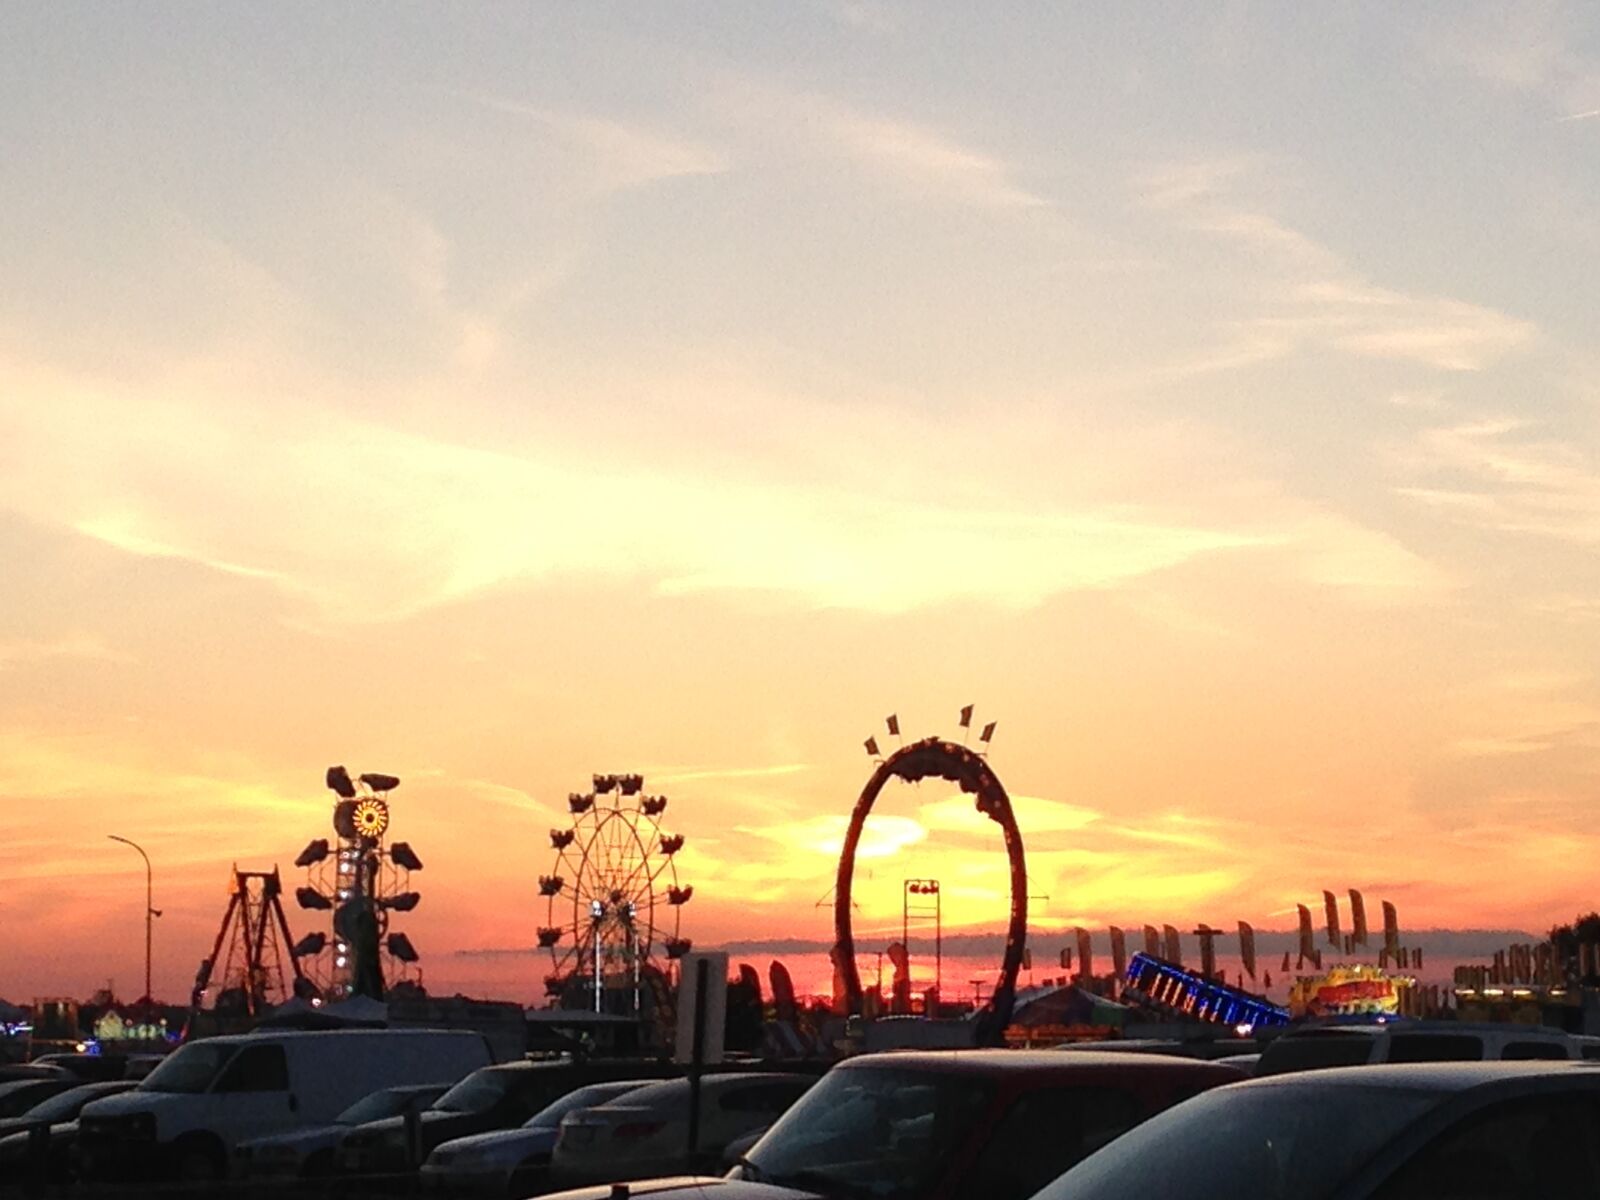 iPhone 5c back camera 4.12mm f/2.4 sample photo. Carnival, sunset, summer photography